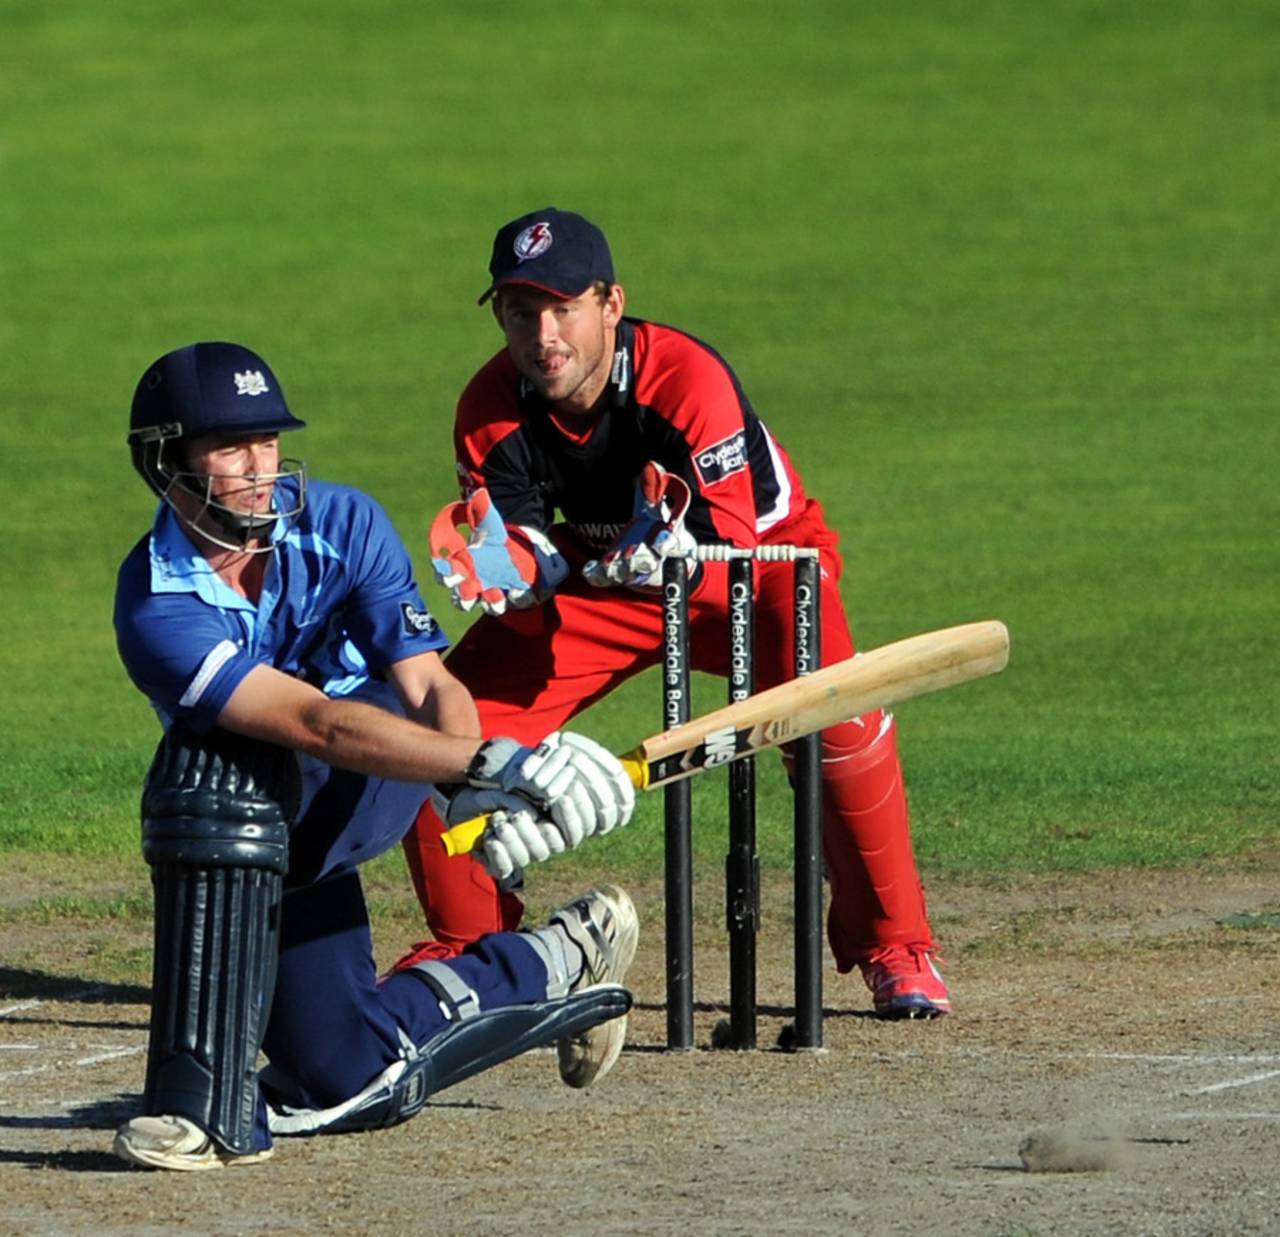 Practising power hitting could help Gloucestershire in the limited-overs formats&nbsp;&nbsp;&bull;&nbsp;&nbsp;Getty Images